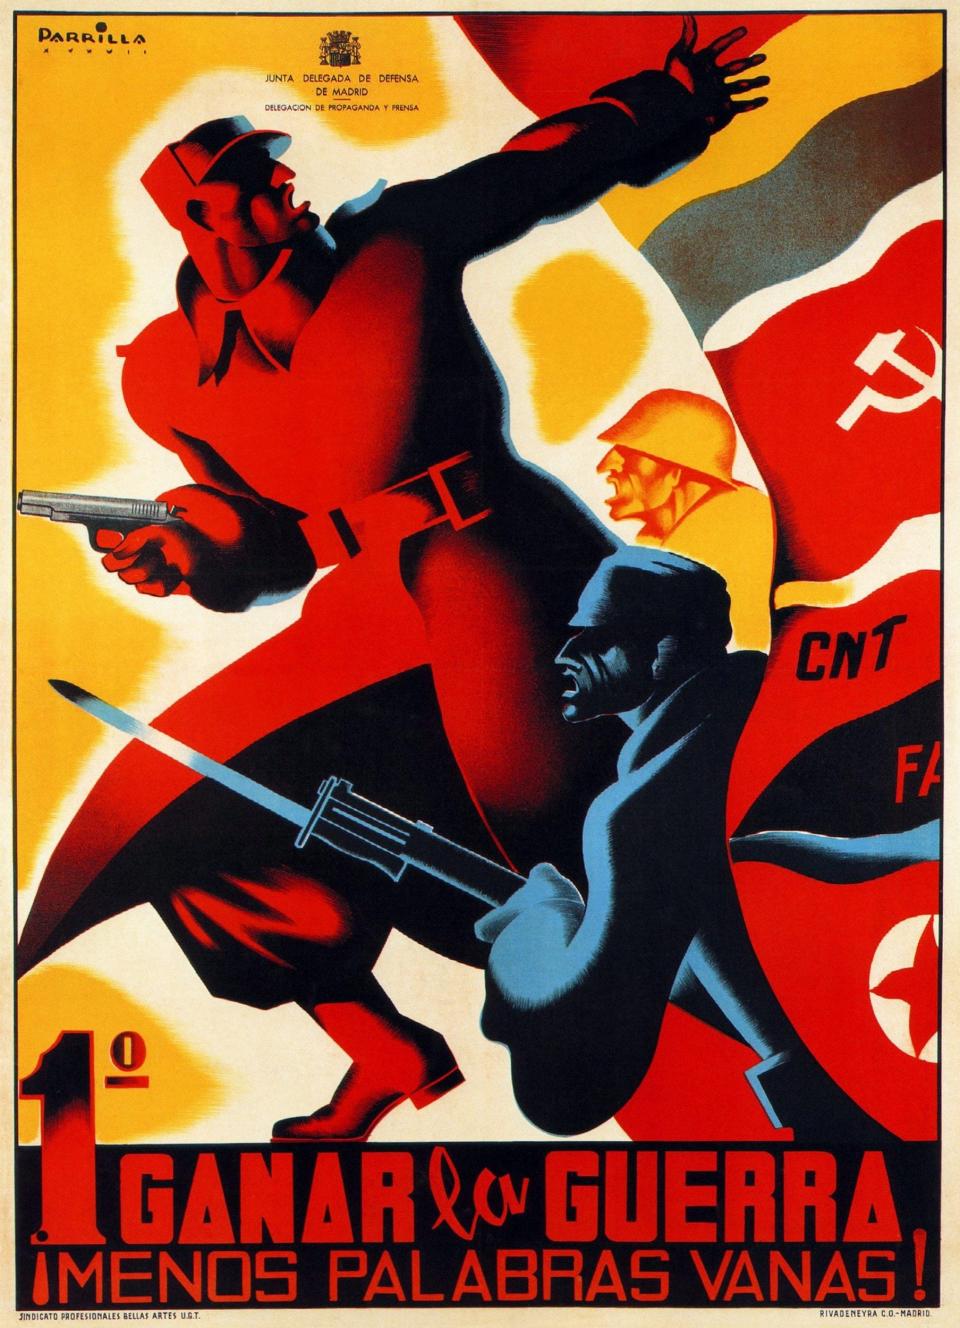 A 1937 Republican poster by the National Confederation of Labour - Getty